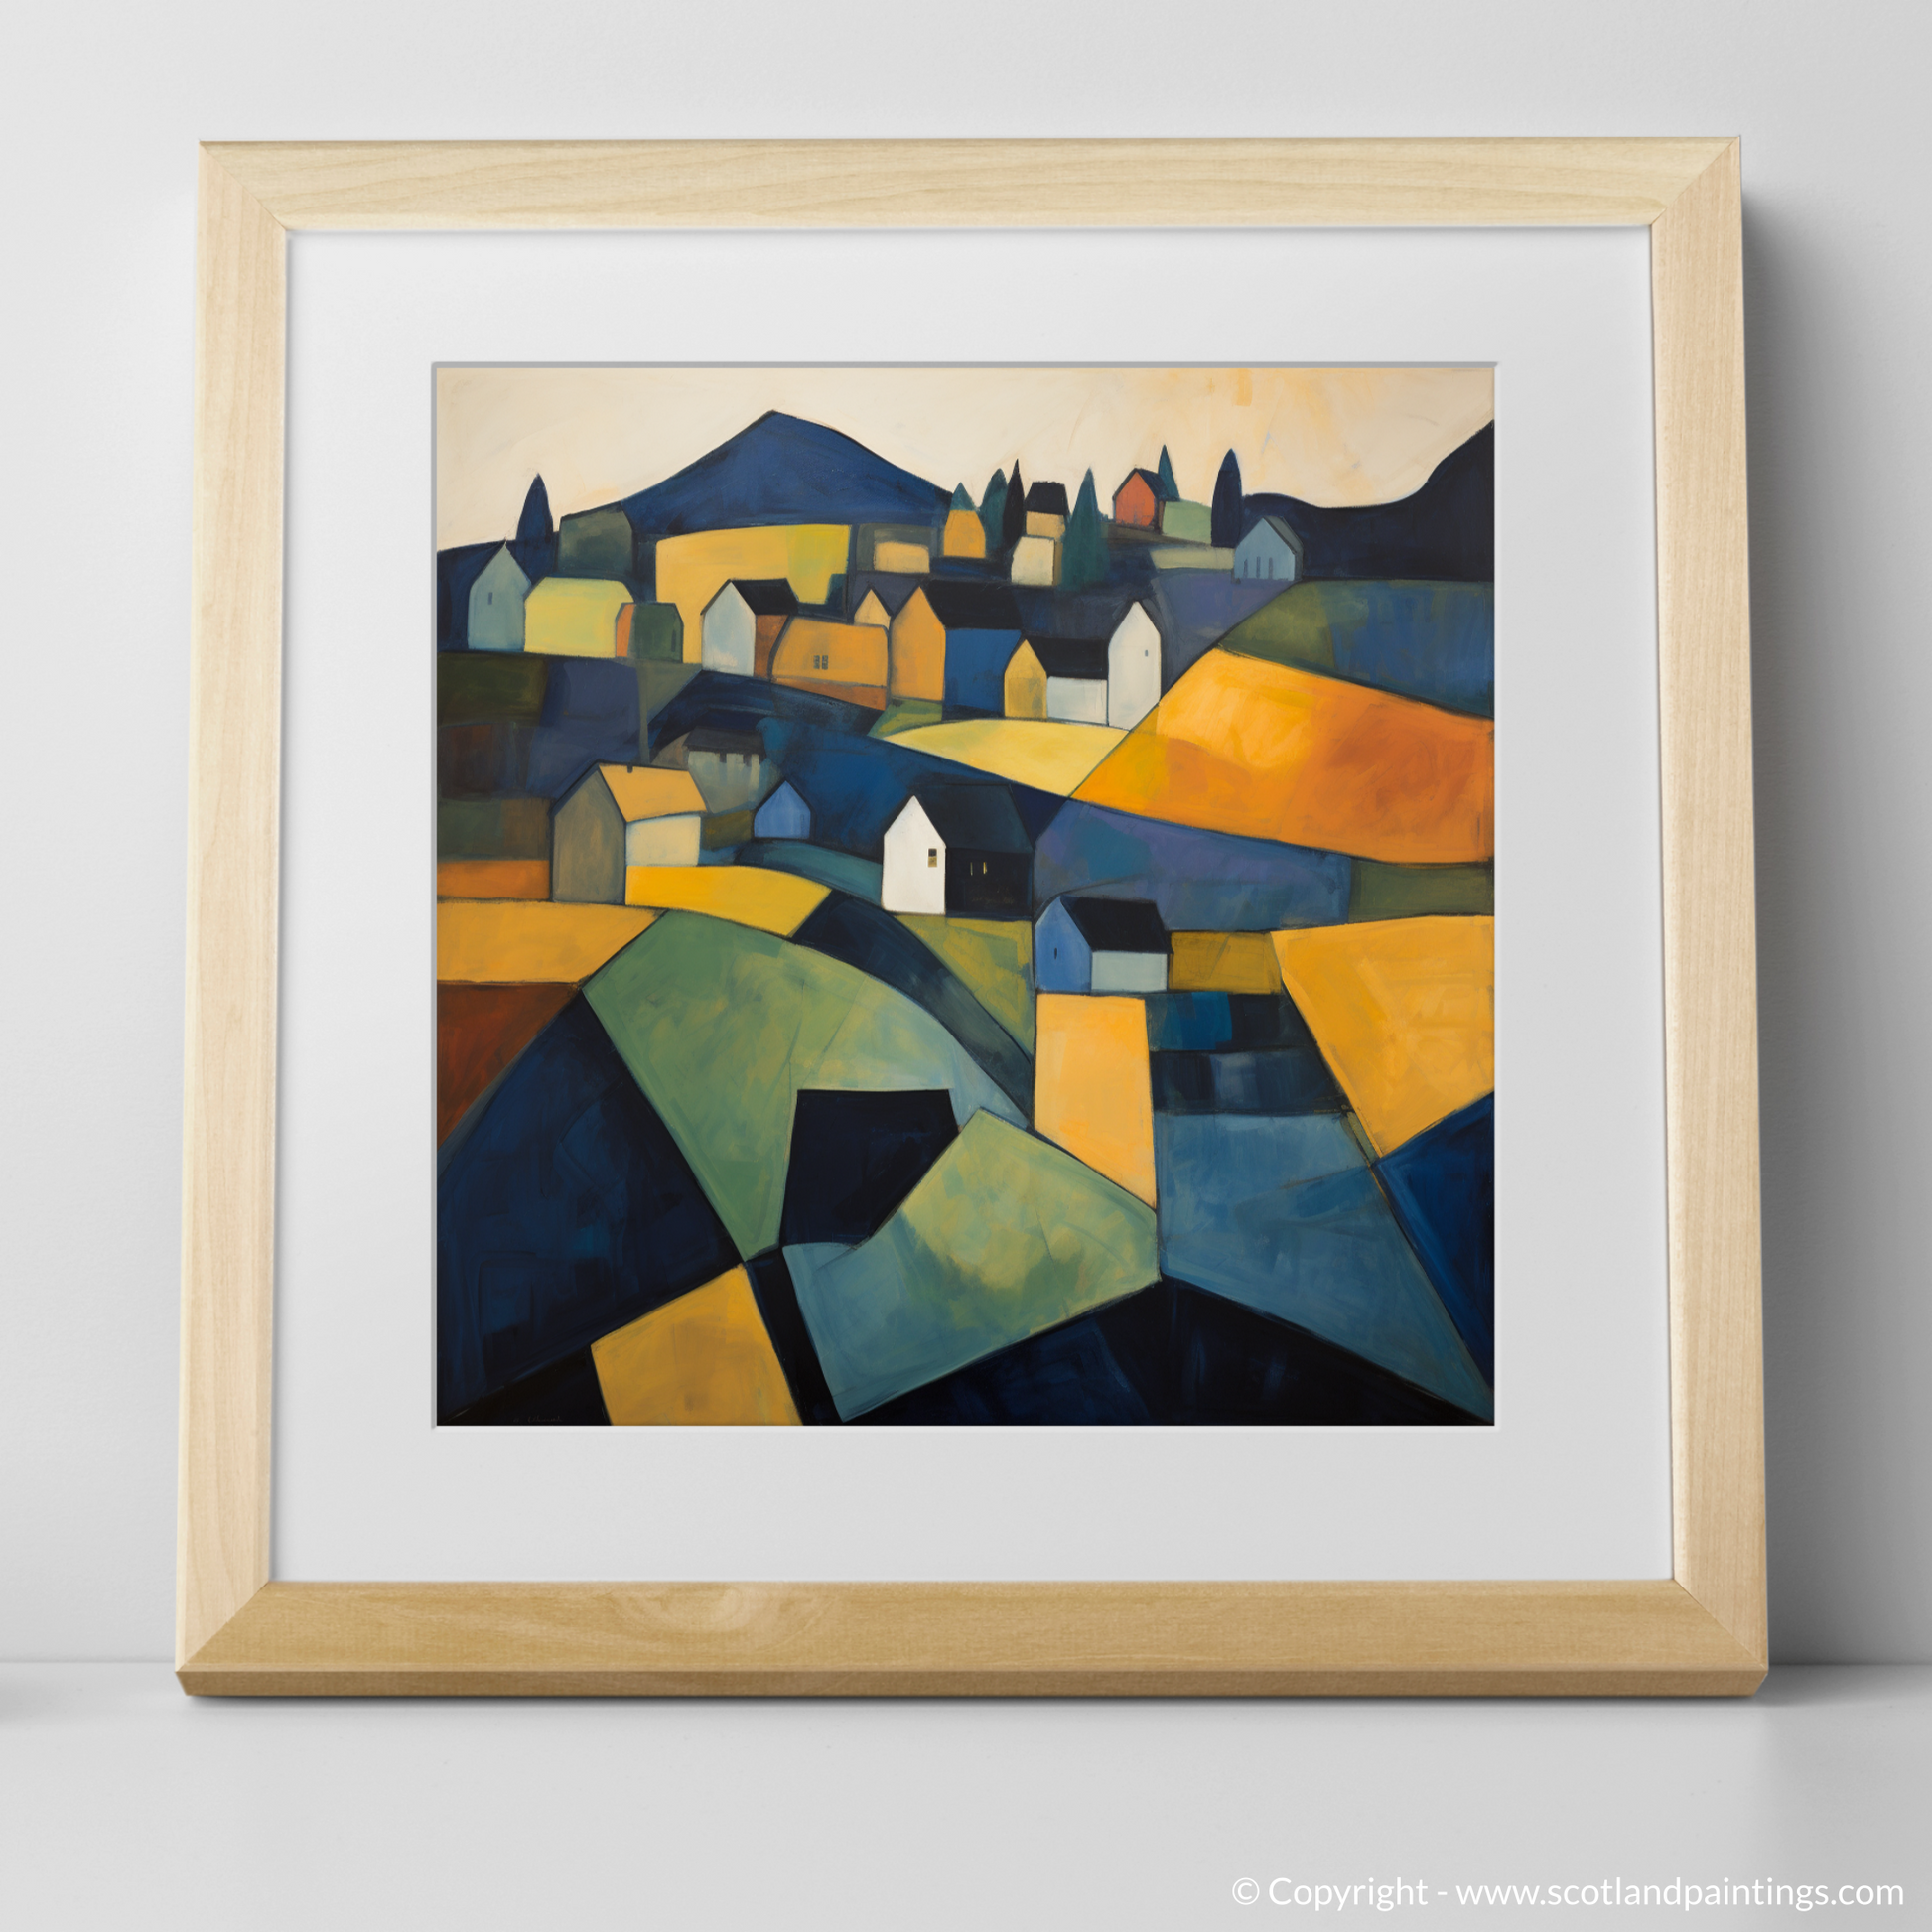 Art Print of Glenmore, Highlands with a natural frame